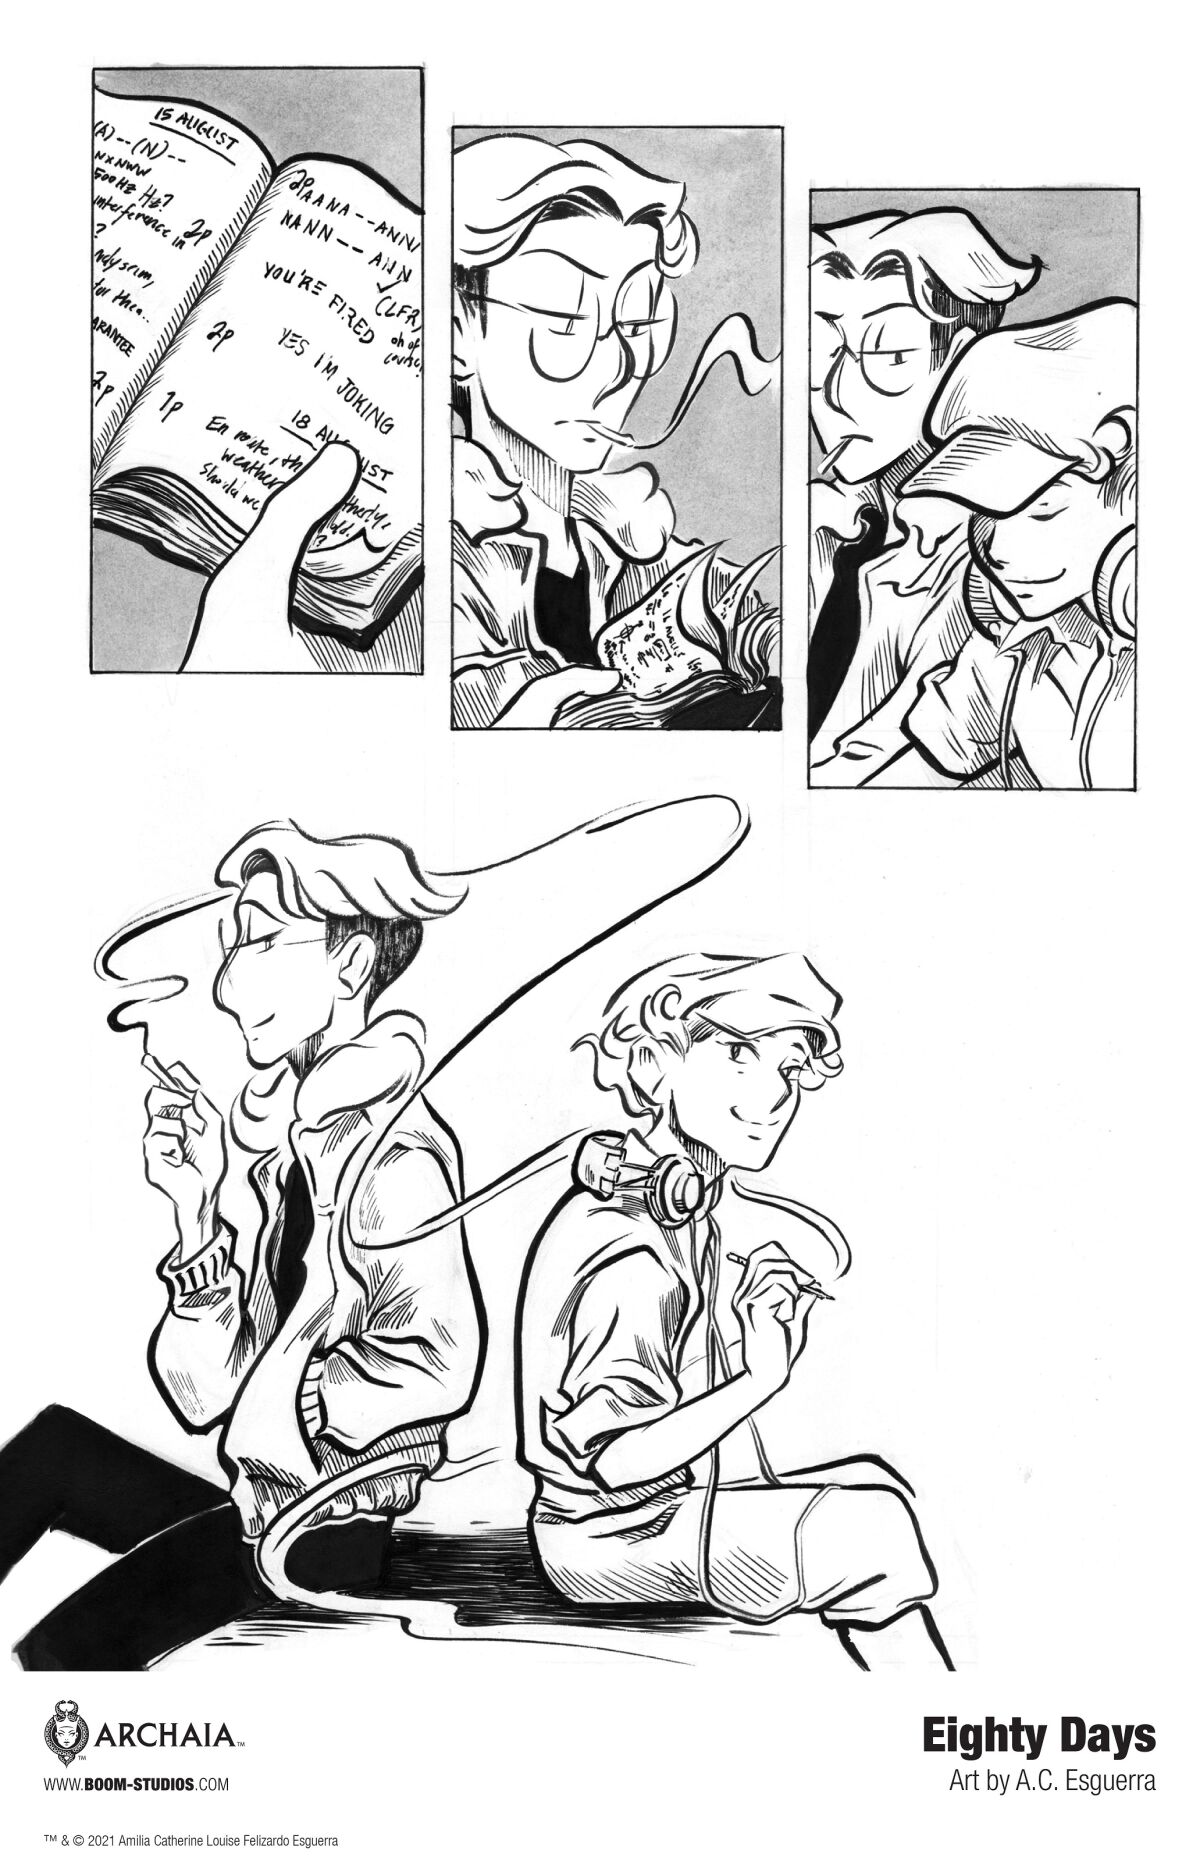 Comic book page with a young man smoking and another with headphones 